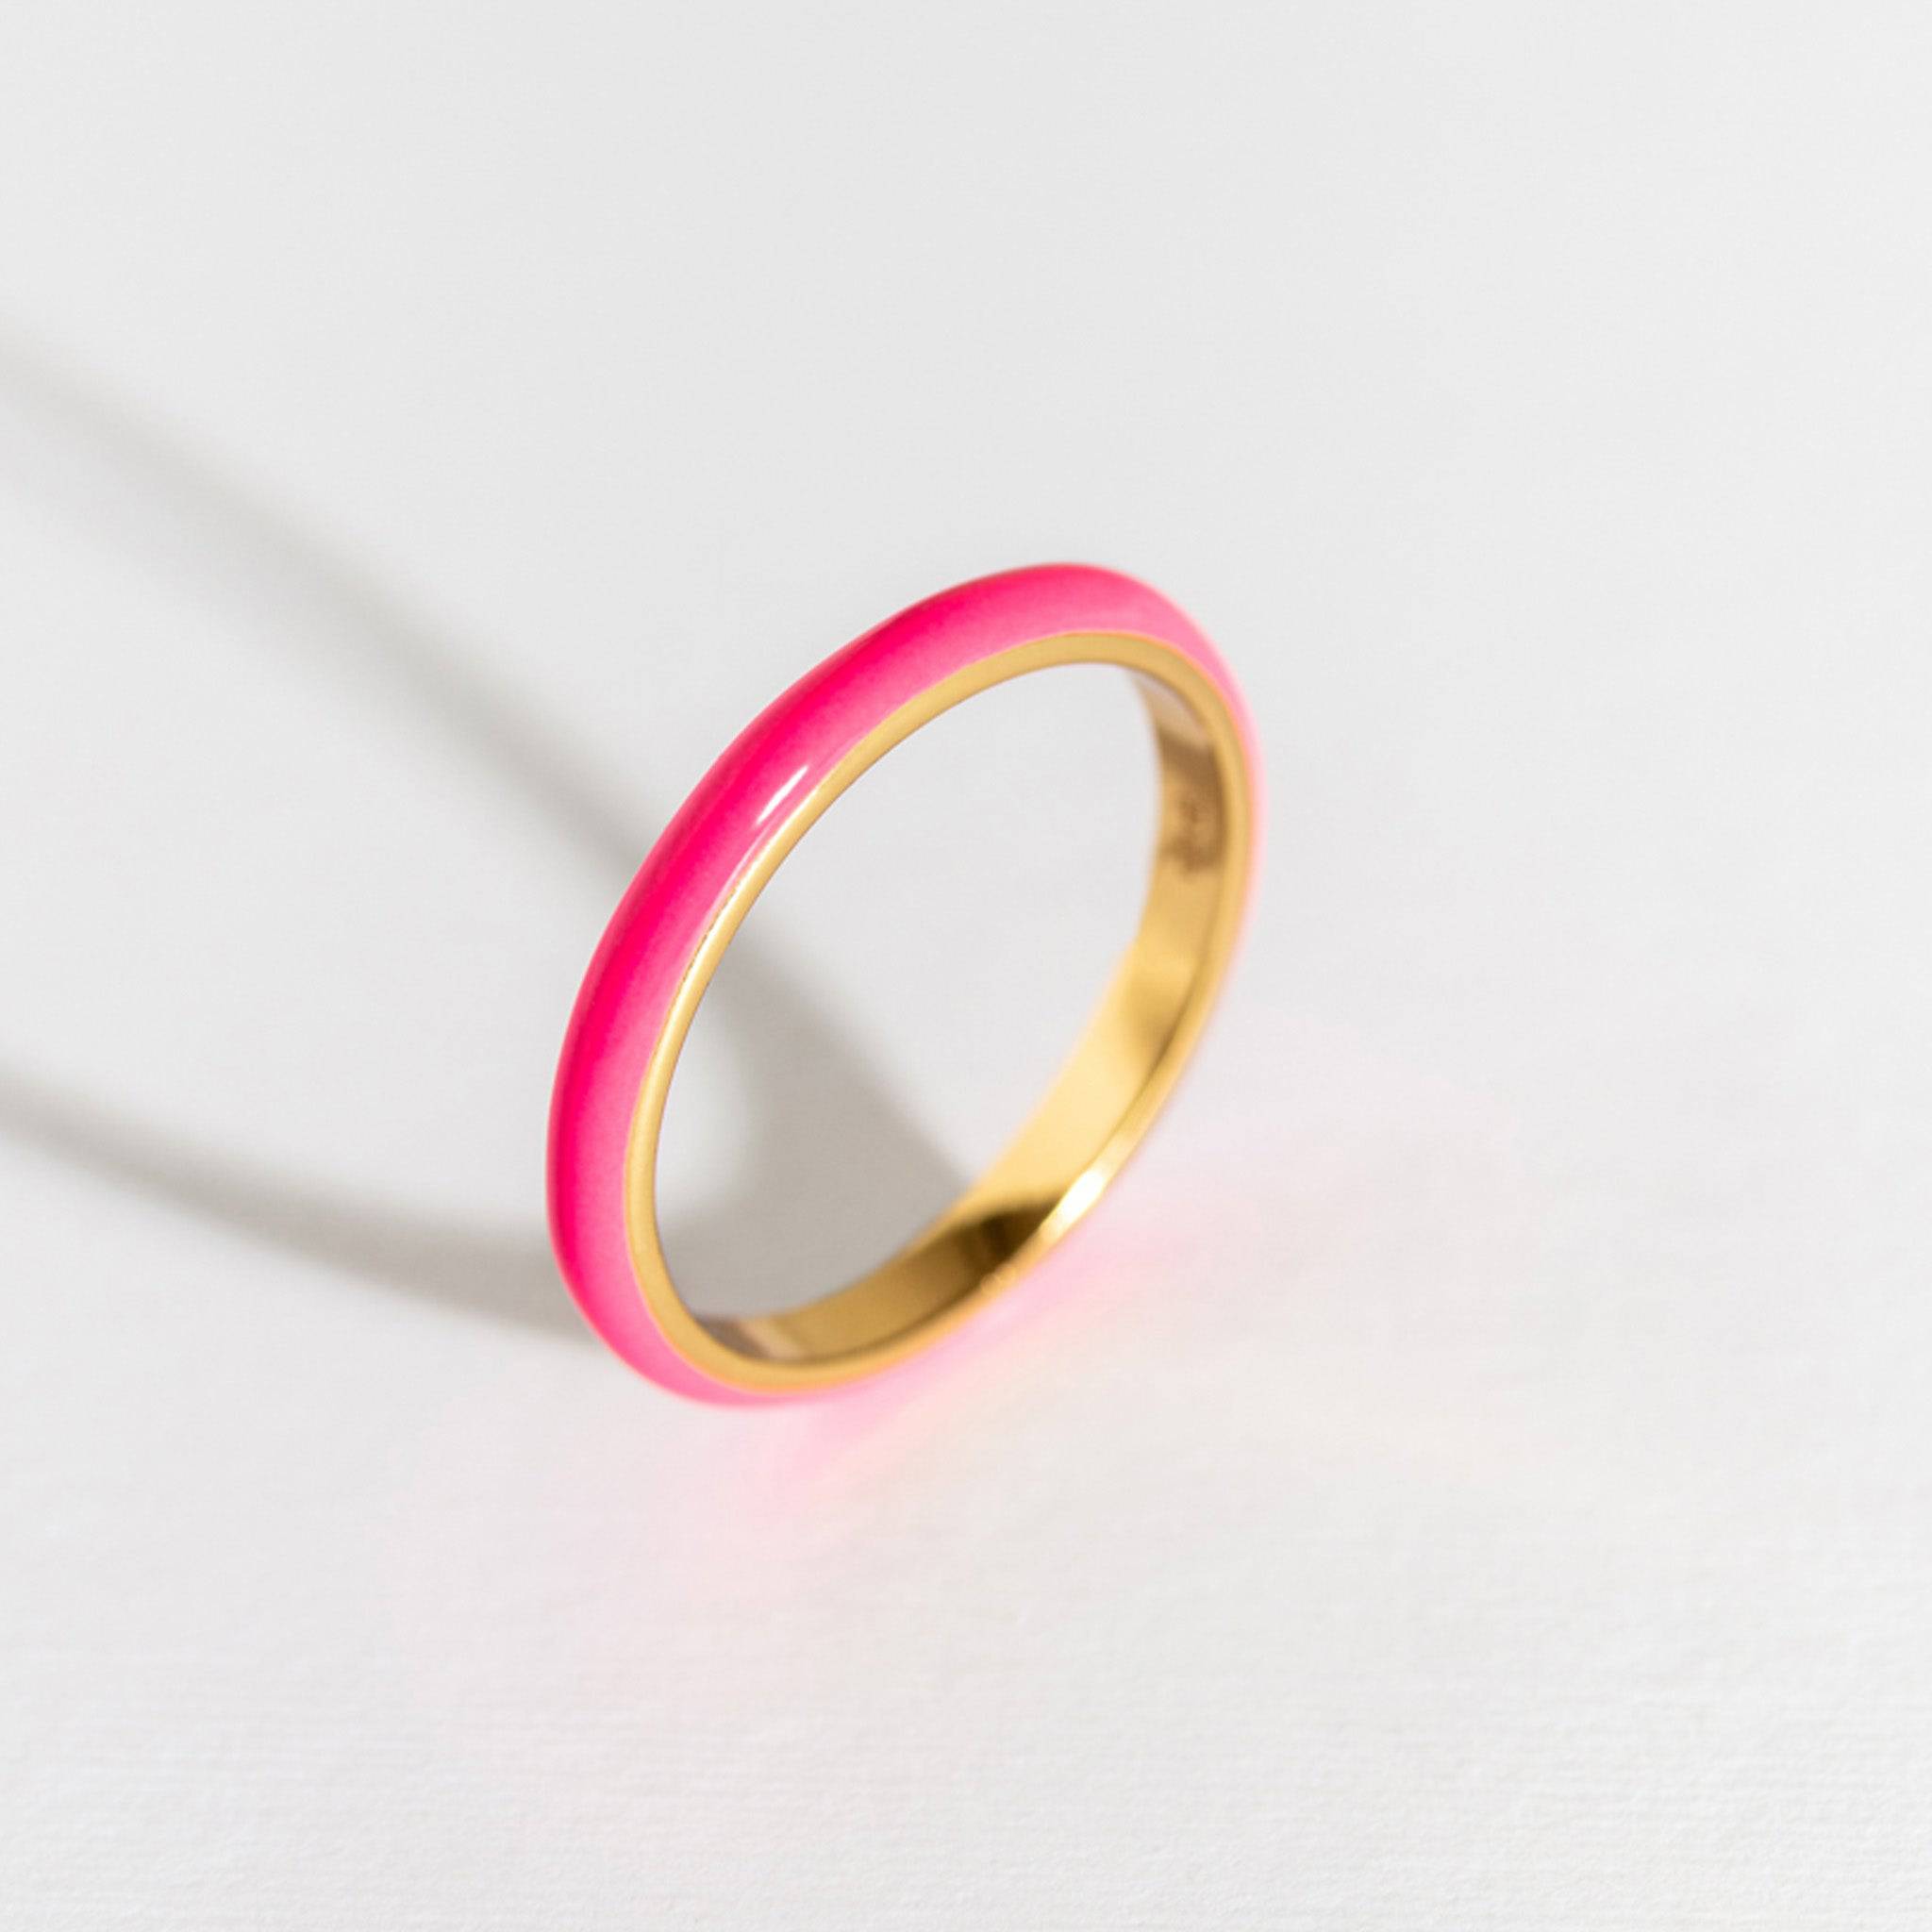 Susie Gold Band Ring in Hot Pink Kyocera Opal | Kendra Scott